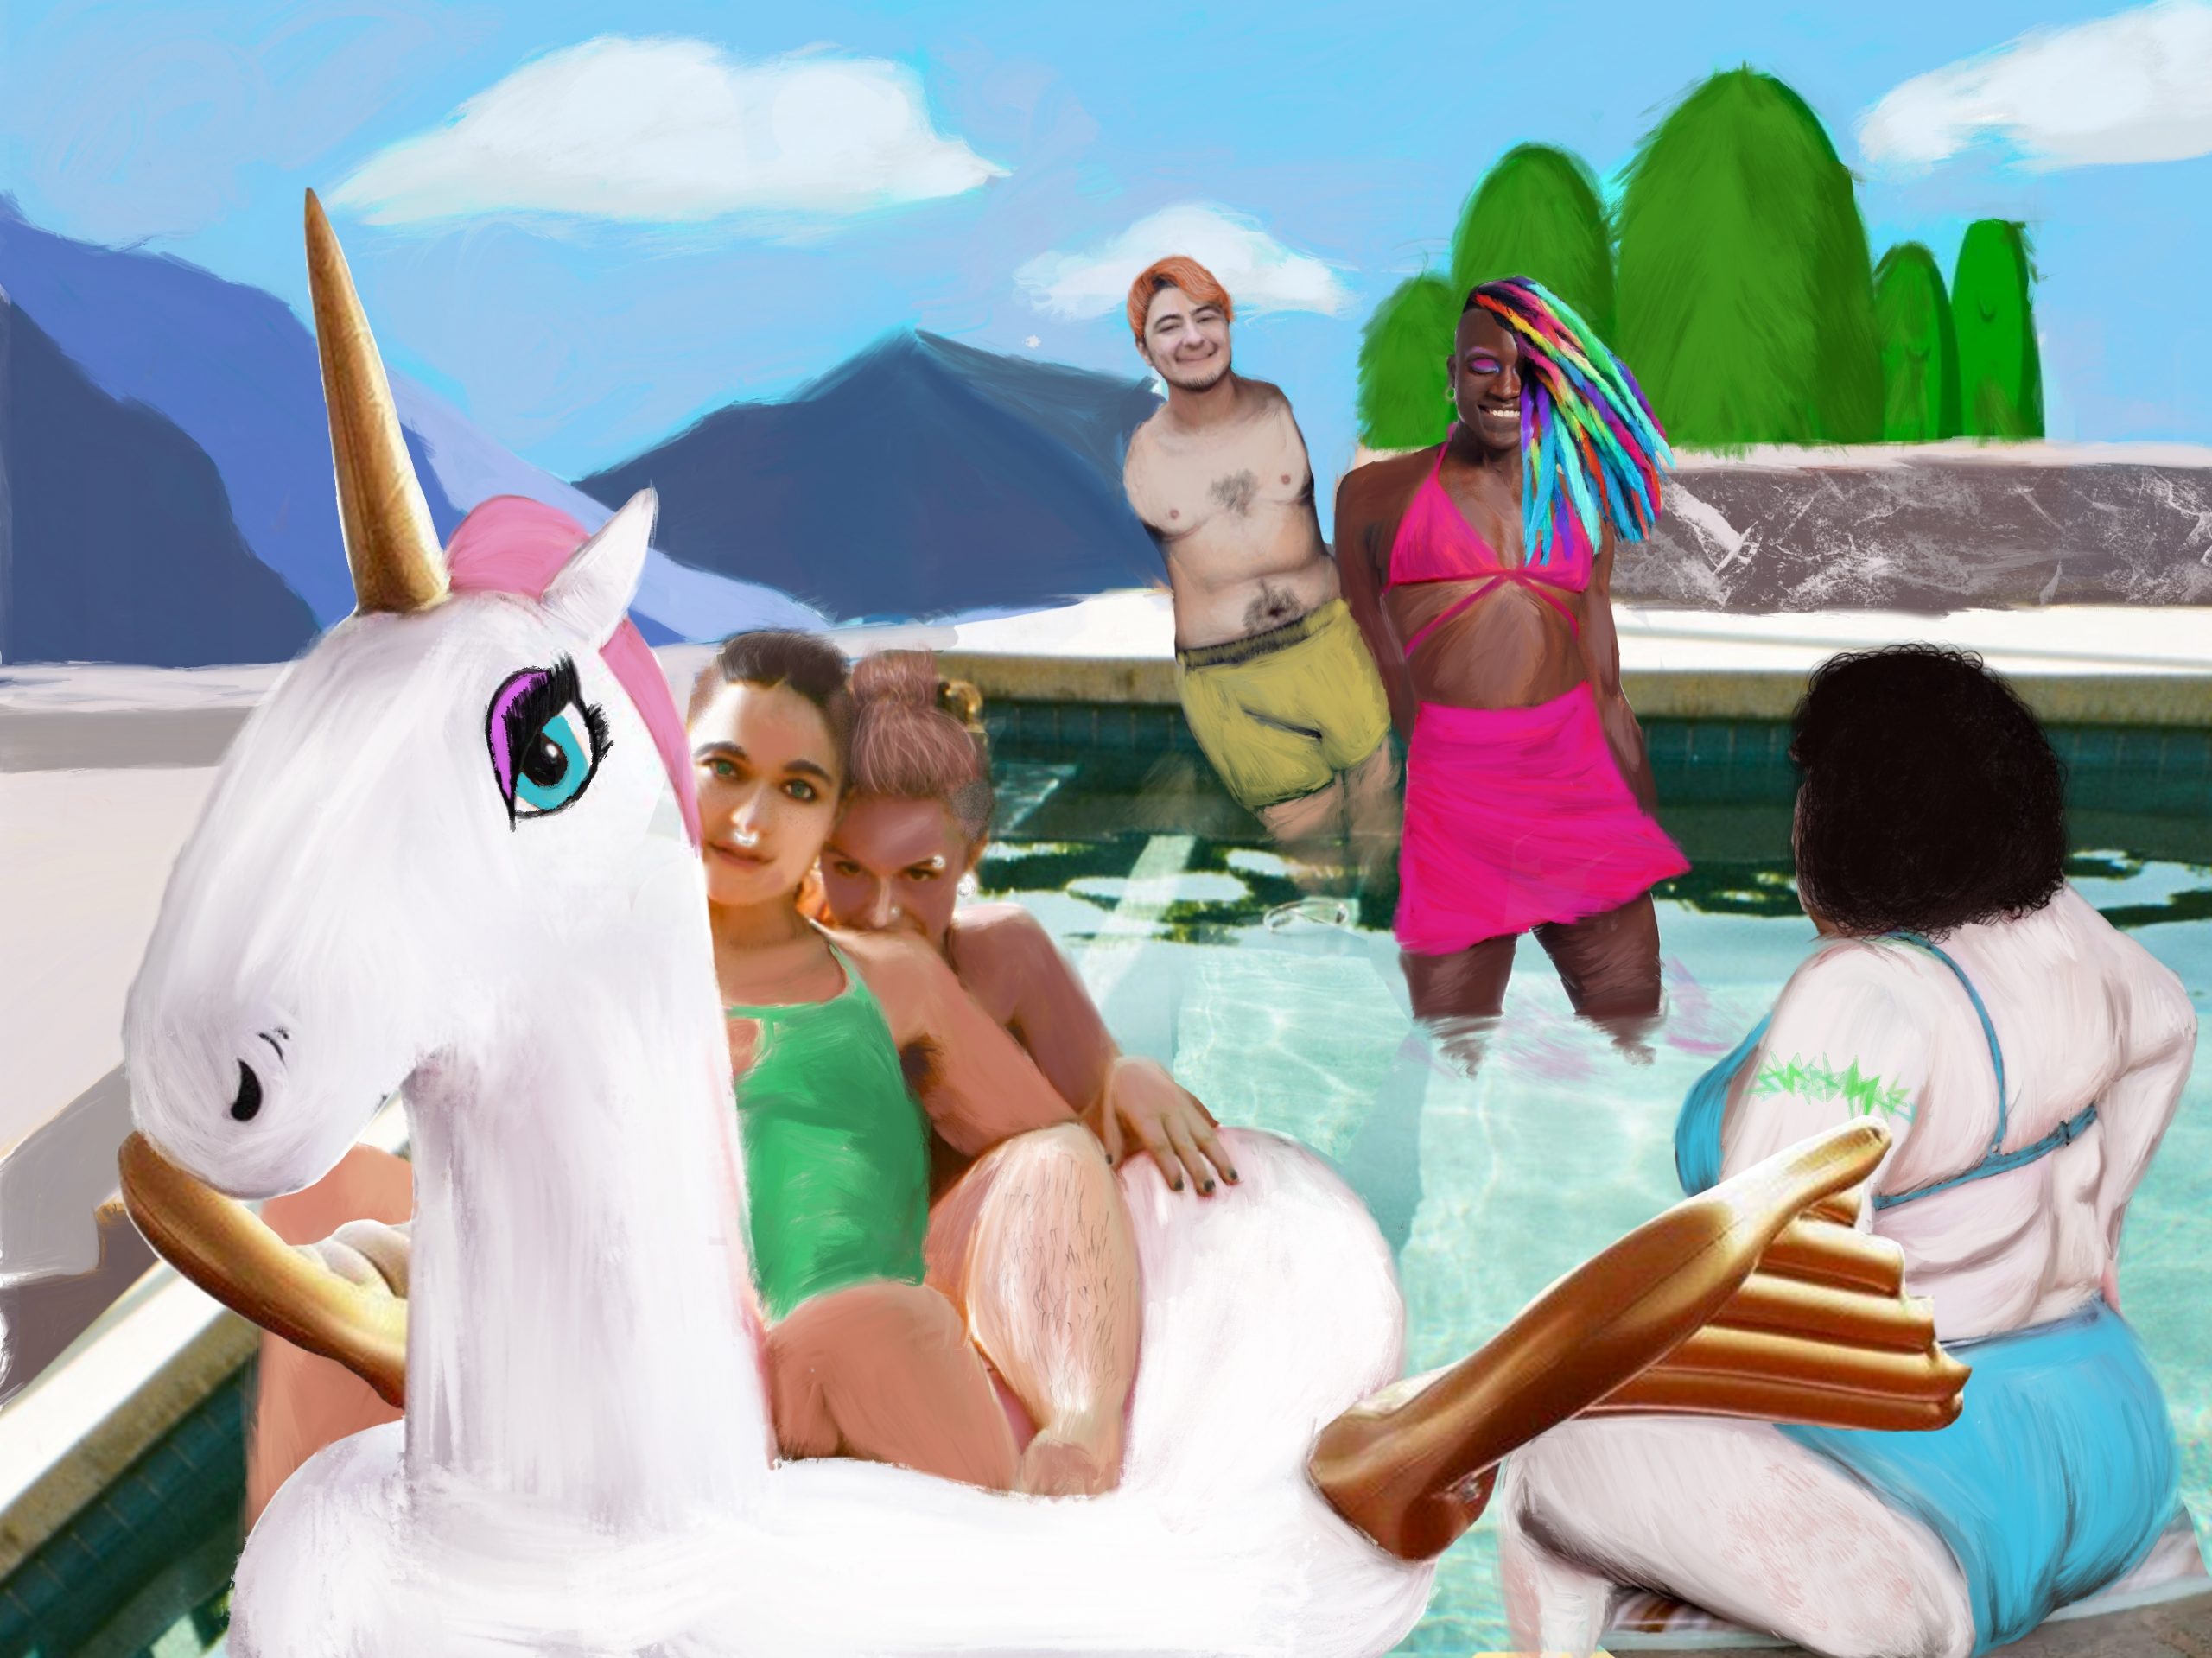 digital painting of a group of queer people with different body types and identities enjoying a day at the pool